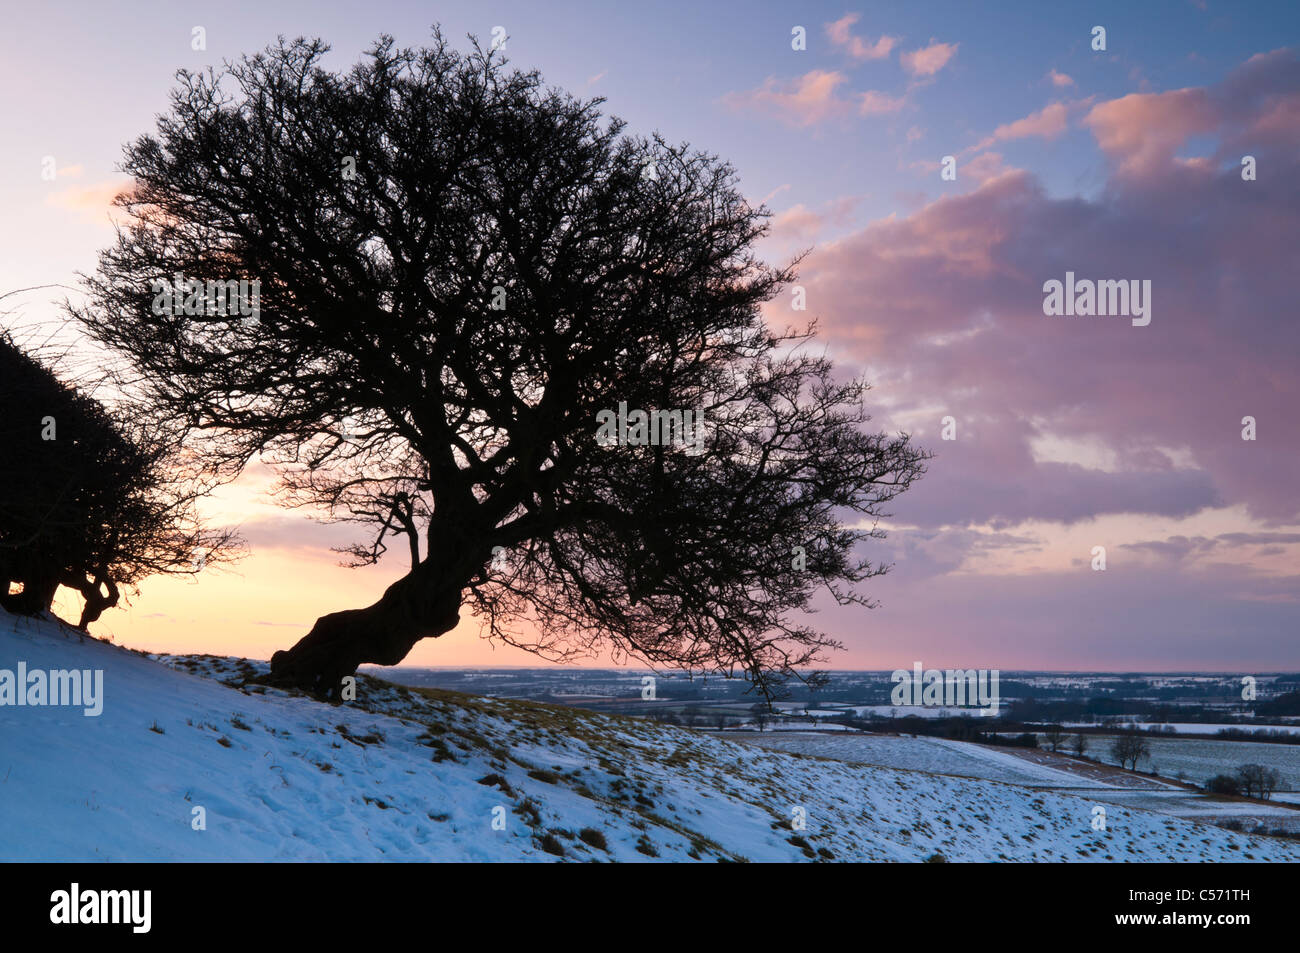 A lone Hawthorn tree silhouetted against a colourful sky at sunset on the snowy slopes of Honey Hill, Northamptonshire, England Stock Photo